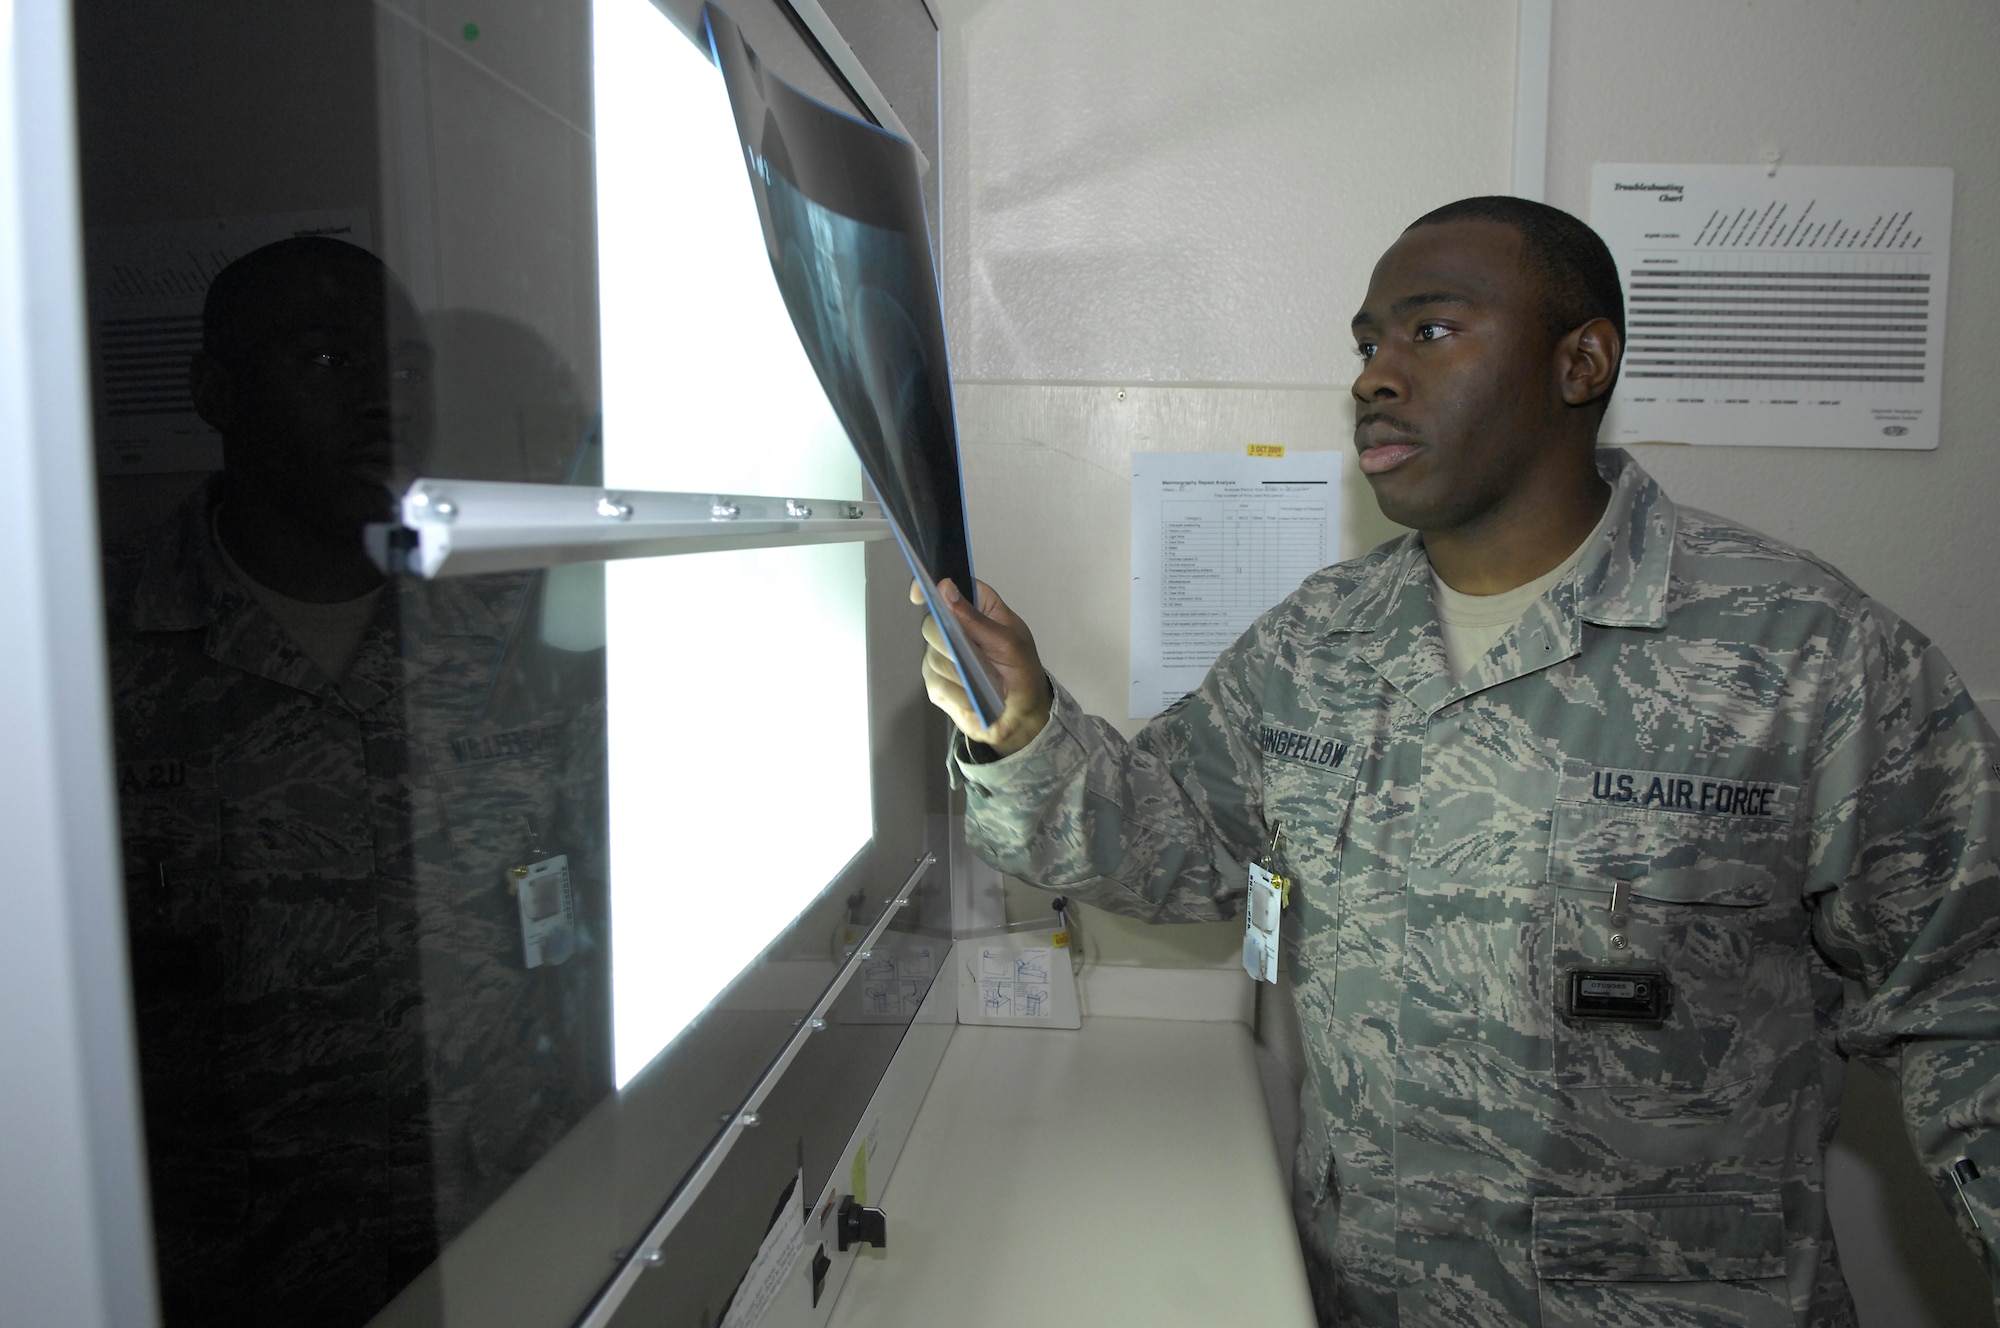 MINOT AIR FORCE BASE, N.D. -- Senior Airman Job Stringfellow, 5th Medical Operations Squadron diagnostic imaging technician, reviews x-rays using a light box here Nov. 9. The 5th Medical Group is meeting the challenge of safe effective delivery of healthcare coupled with significant deployment and heavy readiness exercise obligations.  The medical group was rated outstanding in eight of the 16 major graded areas during the Air Force Inspection Agency Health Services Inspection and captured an overall excellent rating.  (U.S. Air Force photo by Senior Airman Sharida Jackson)